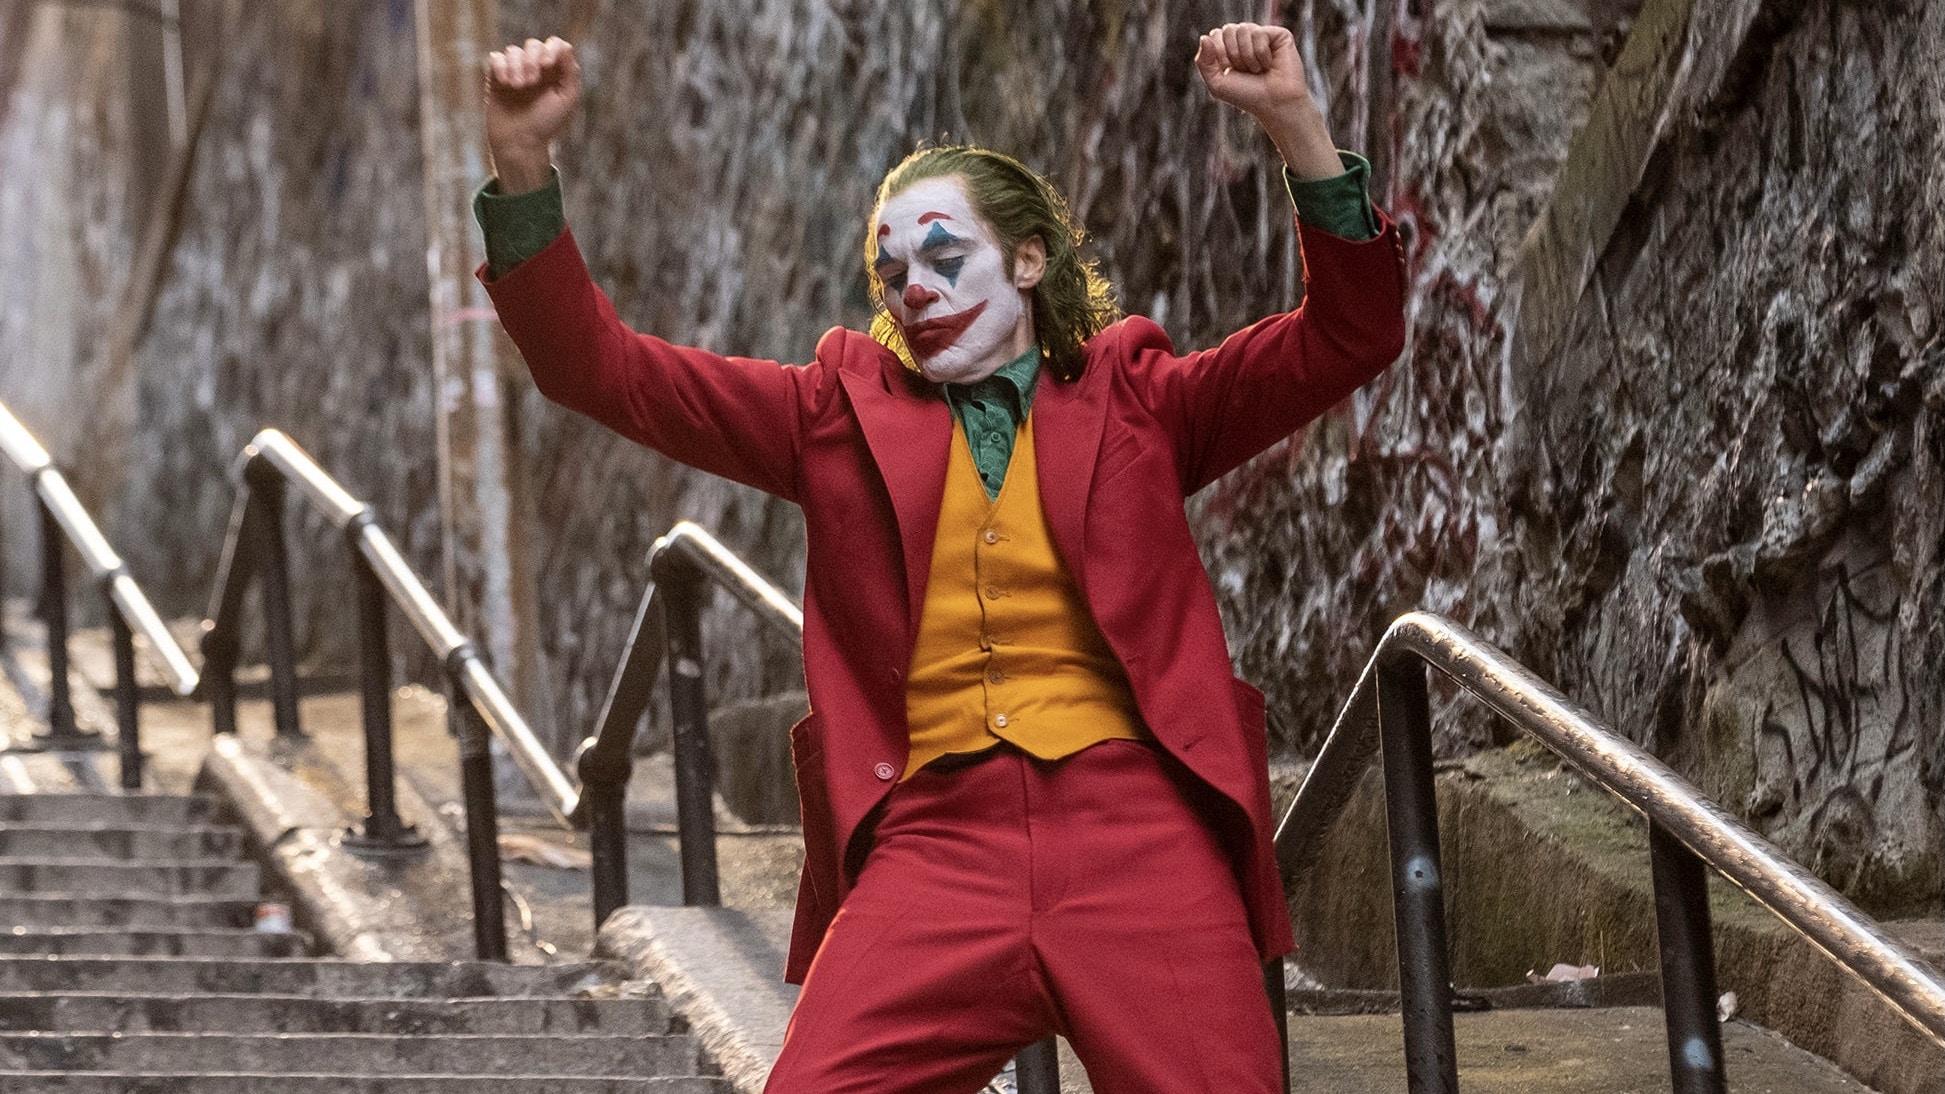 the joker dancing on the stairs